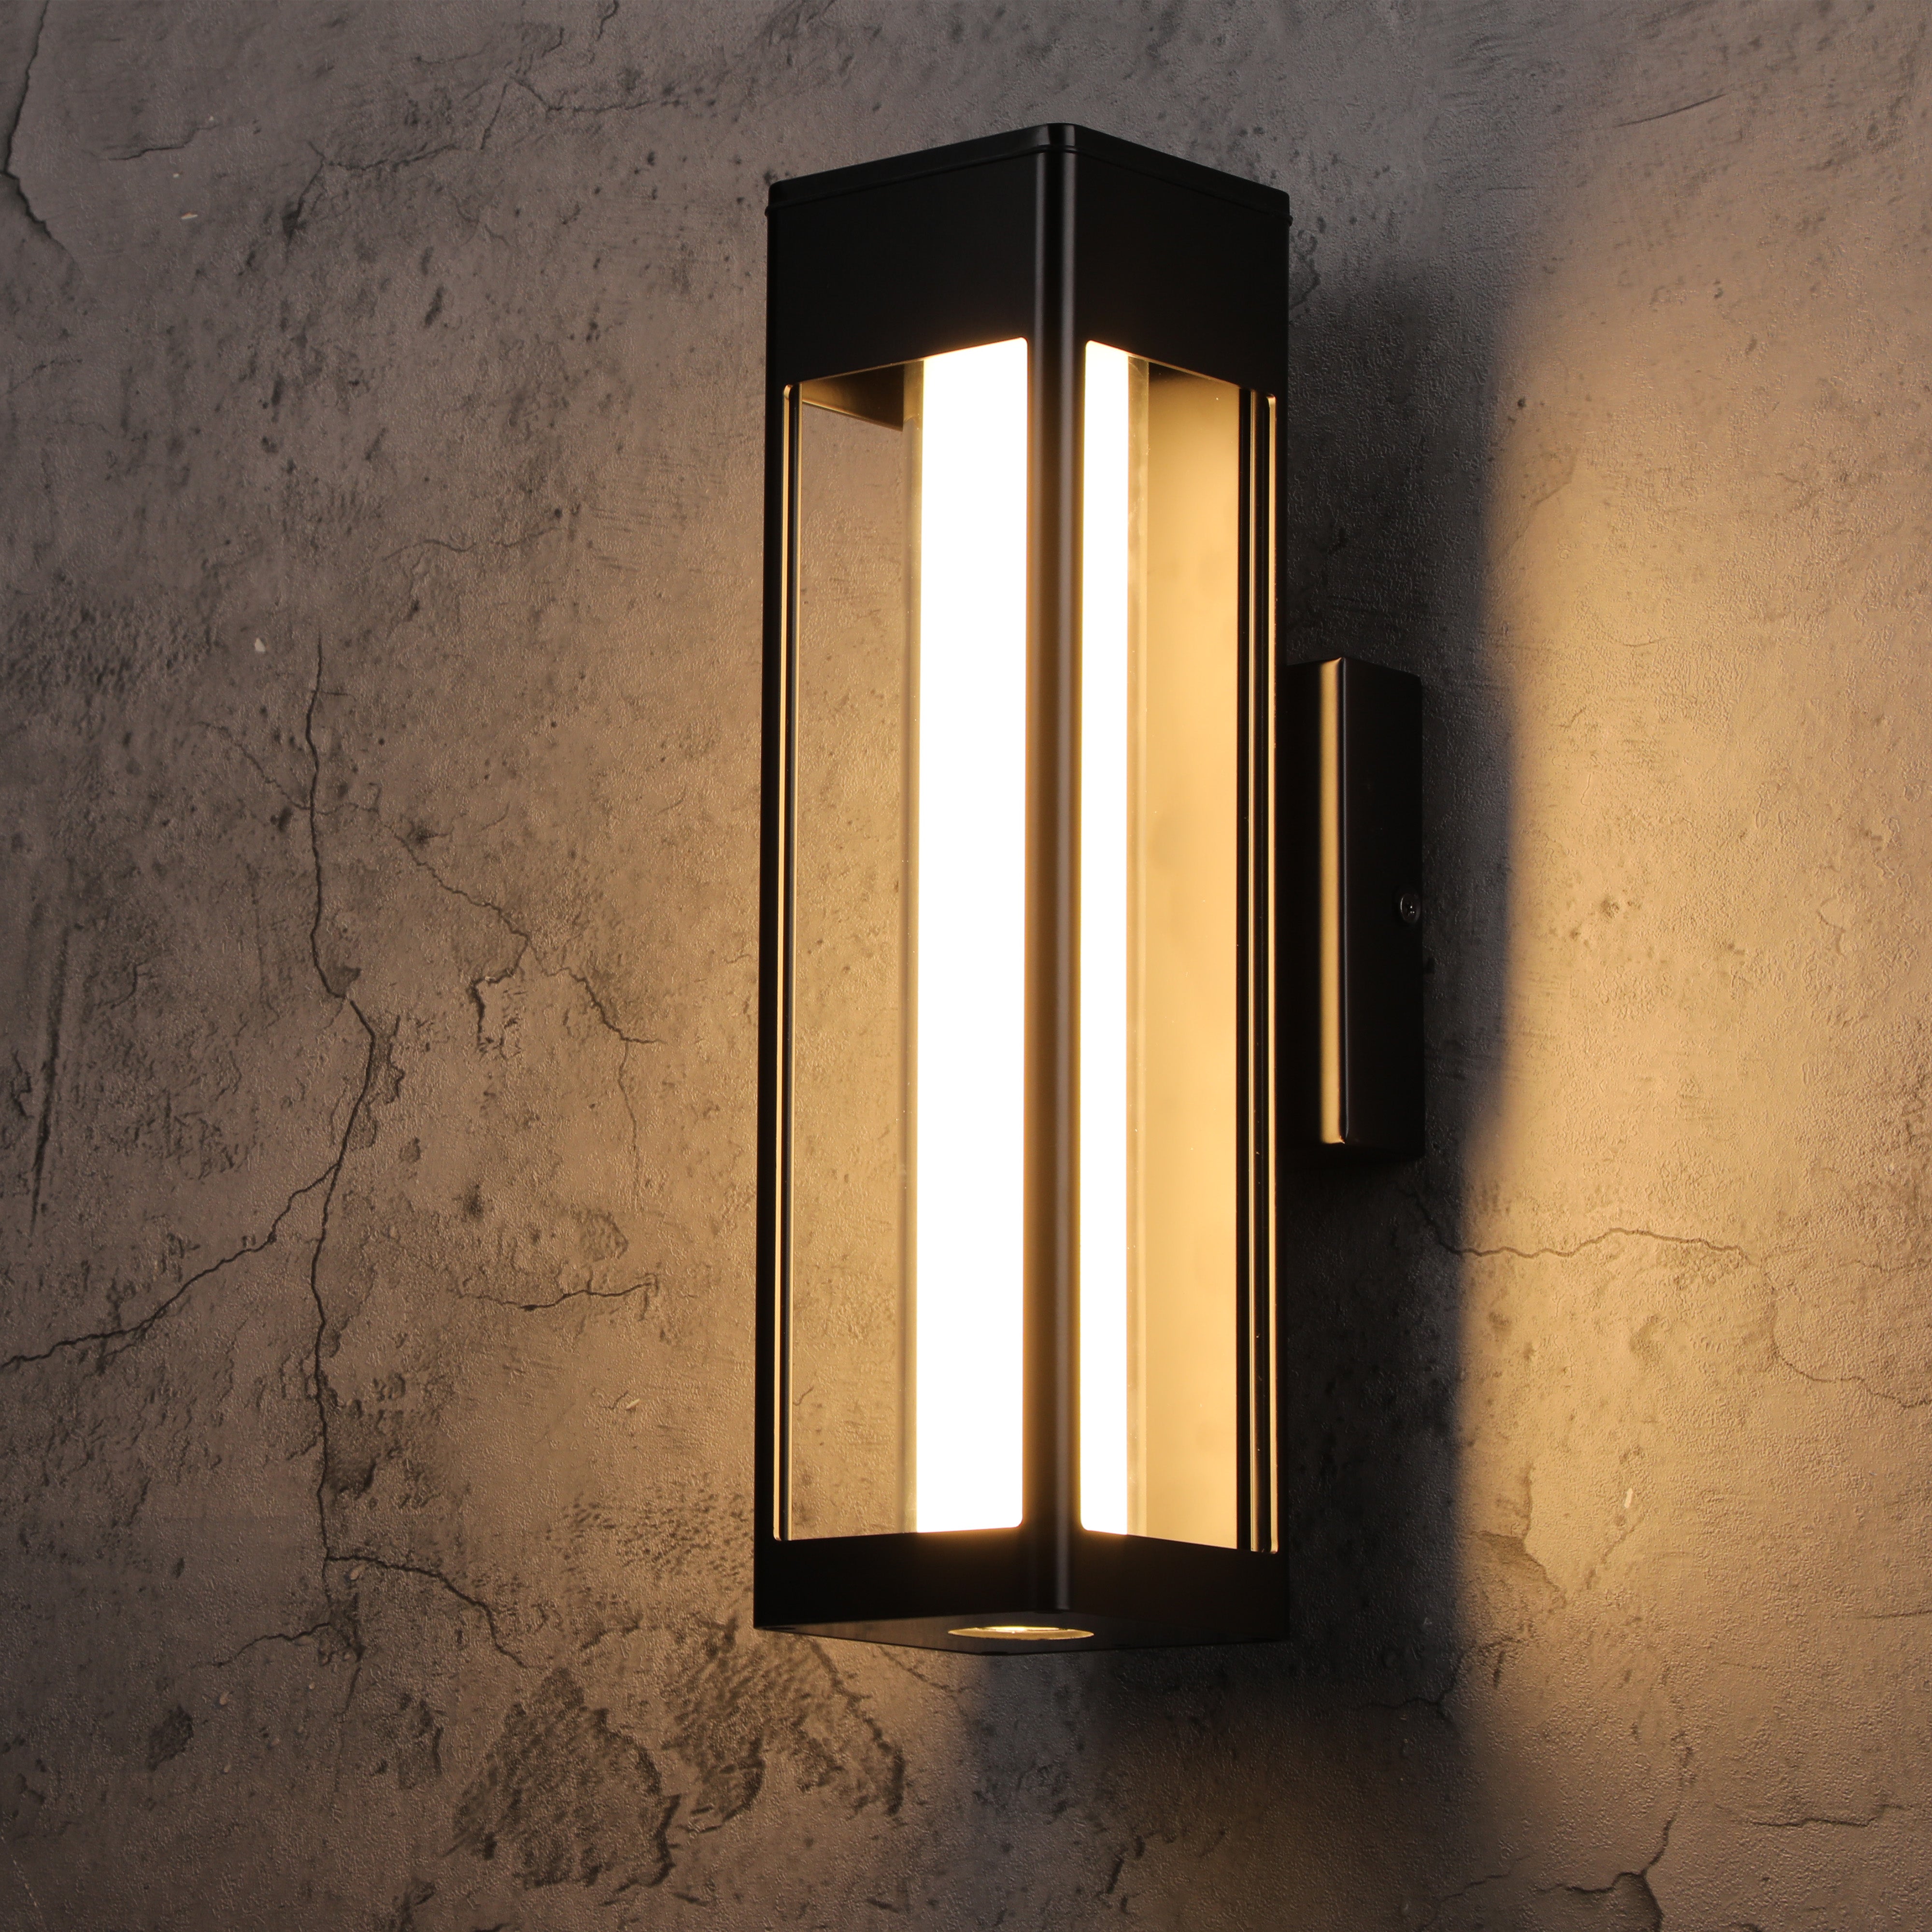 The exRelic 12W Outdoor Wall Sconce